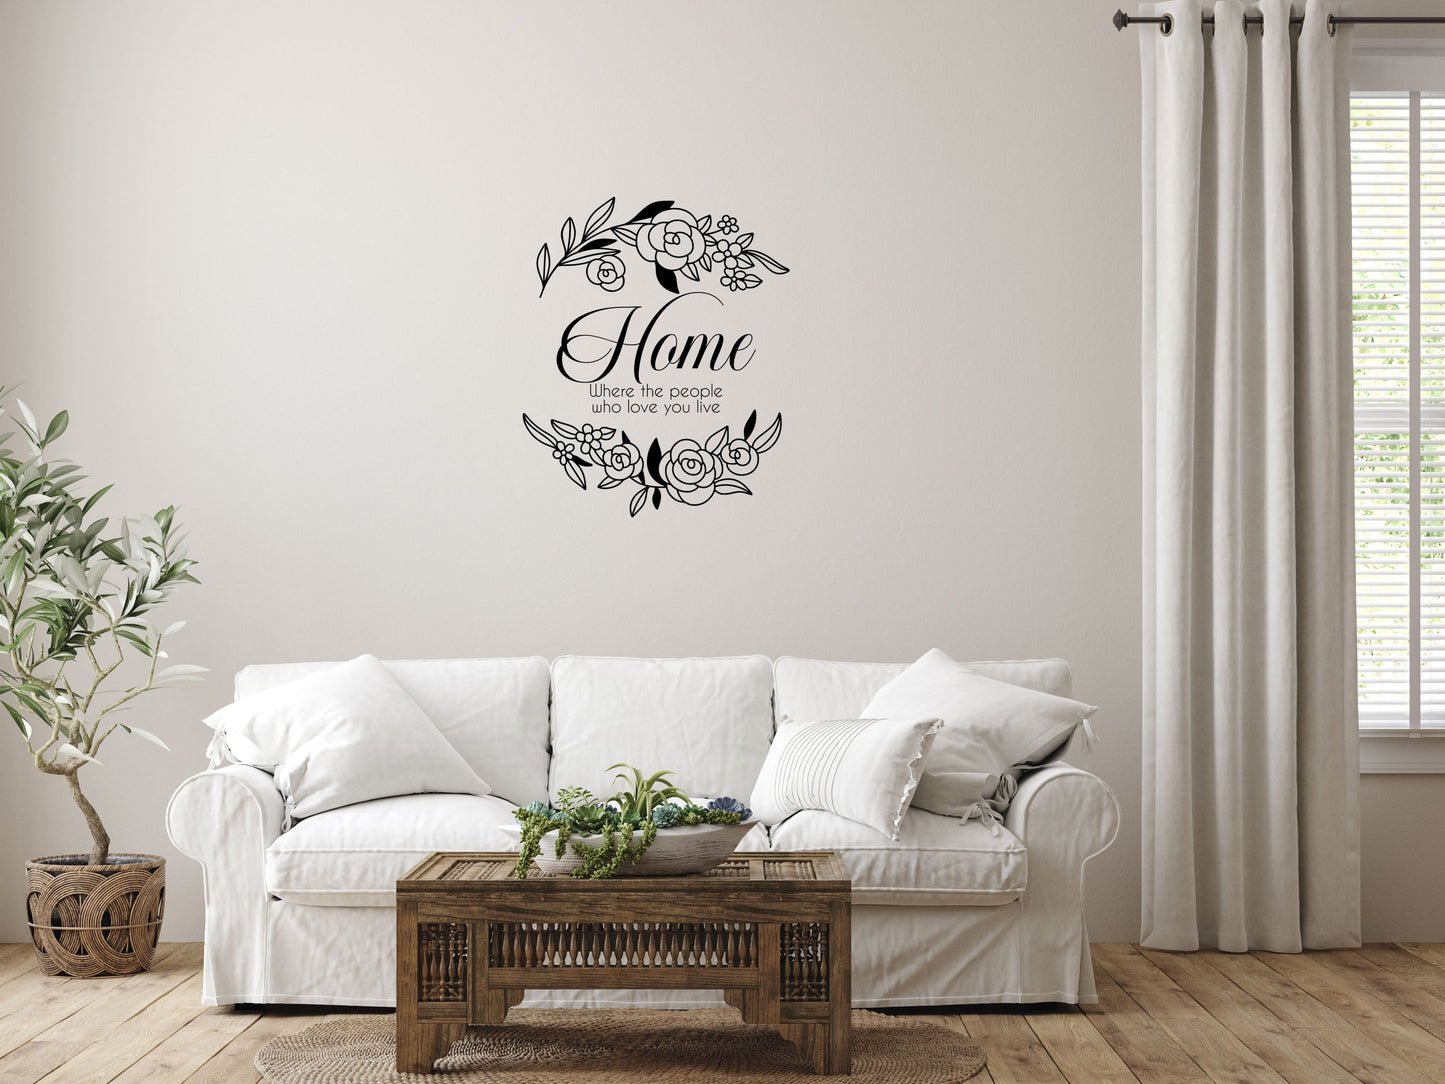 Home Where The People Who Love You Live - Inspirational Wall Decals Vinyl Wall Decal Inspirational Wall Signs 